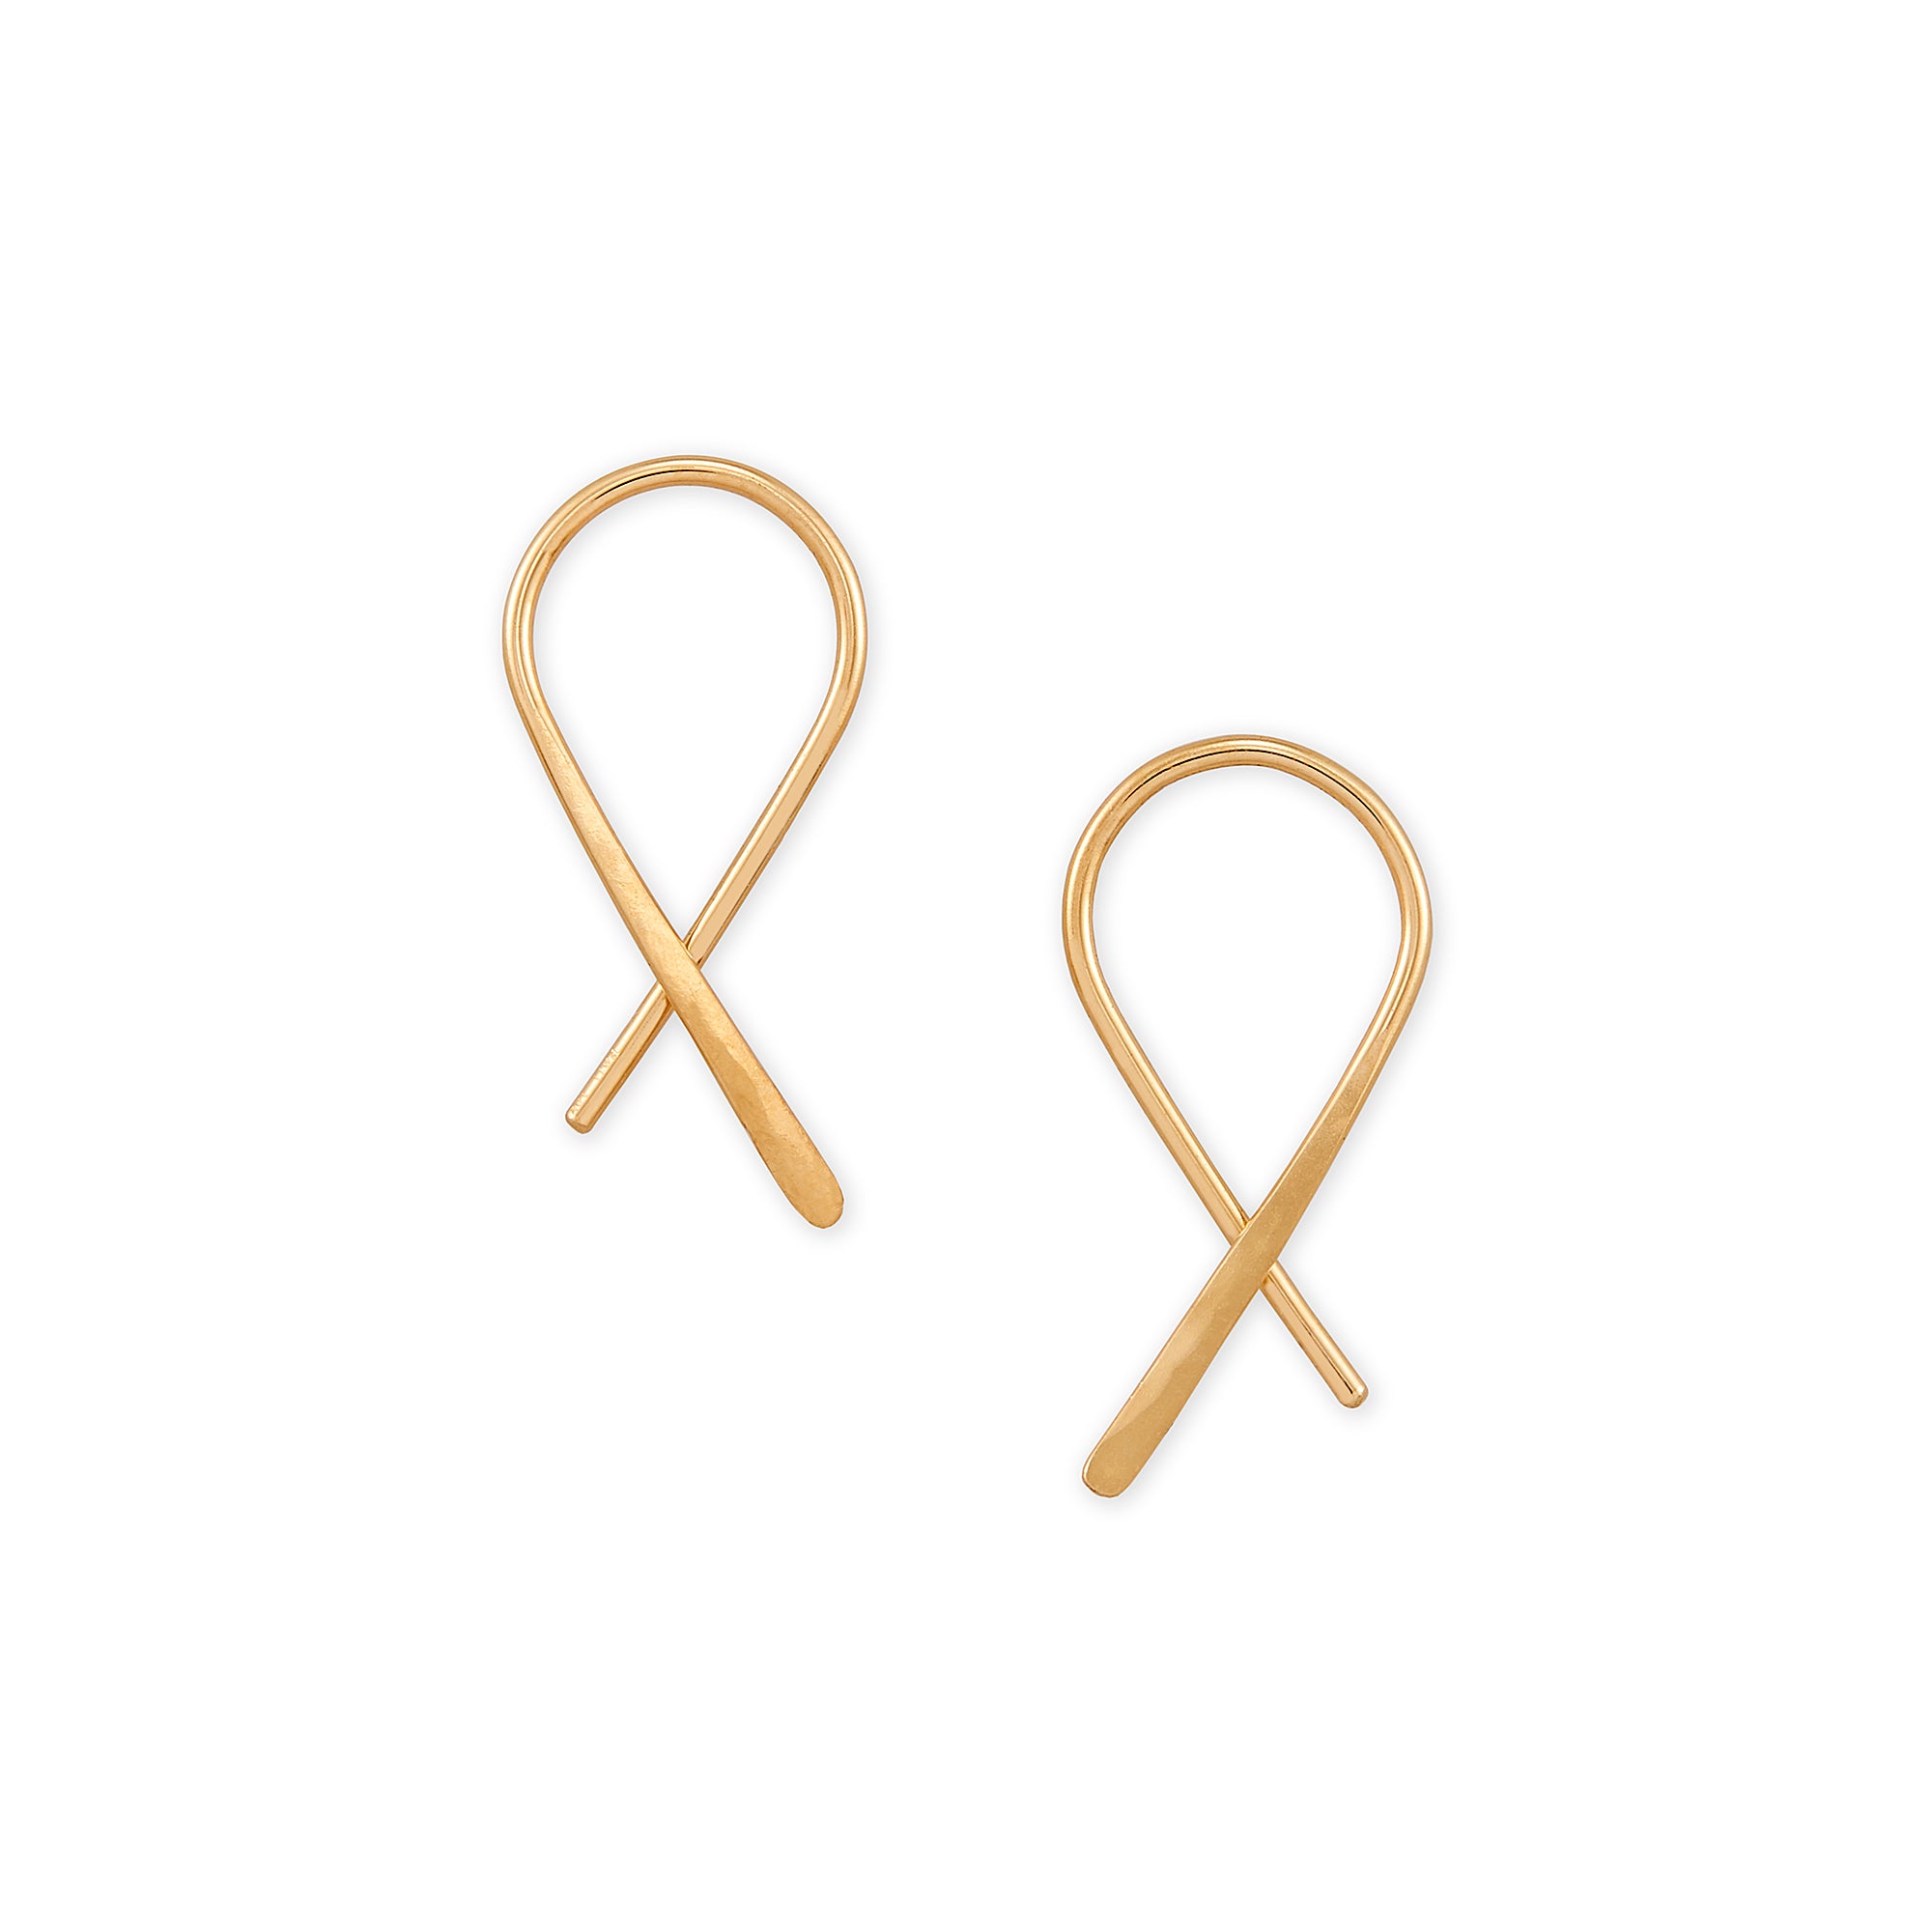 Crossed Hook earrings, these delicate and modern threaders feature crossed 14k gold wire forged on one side. 